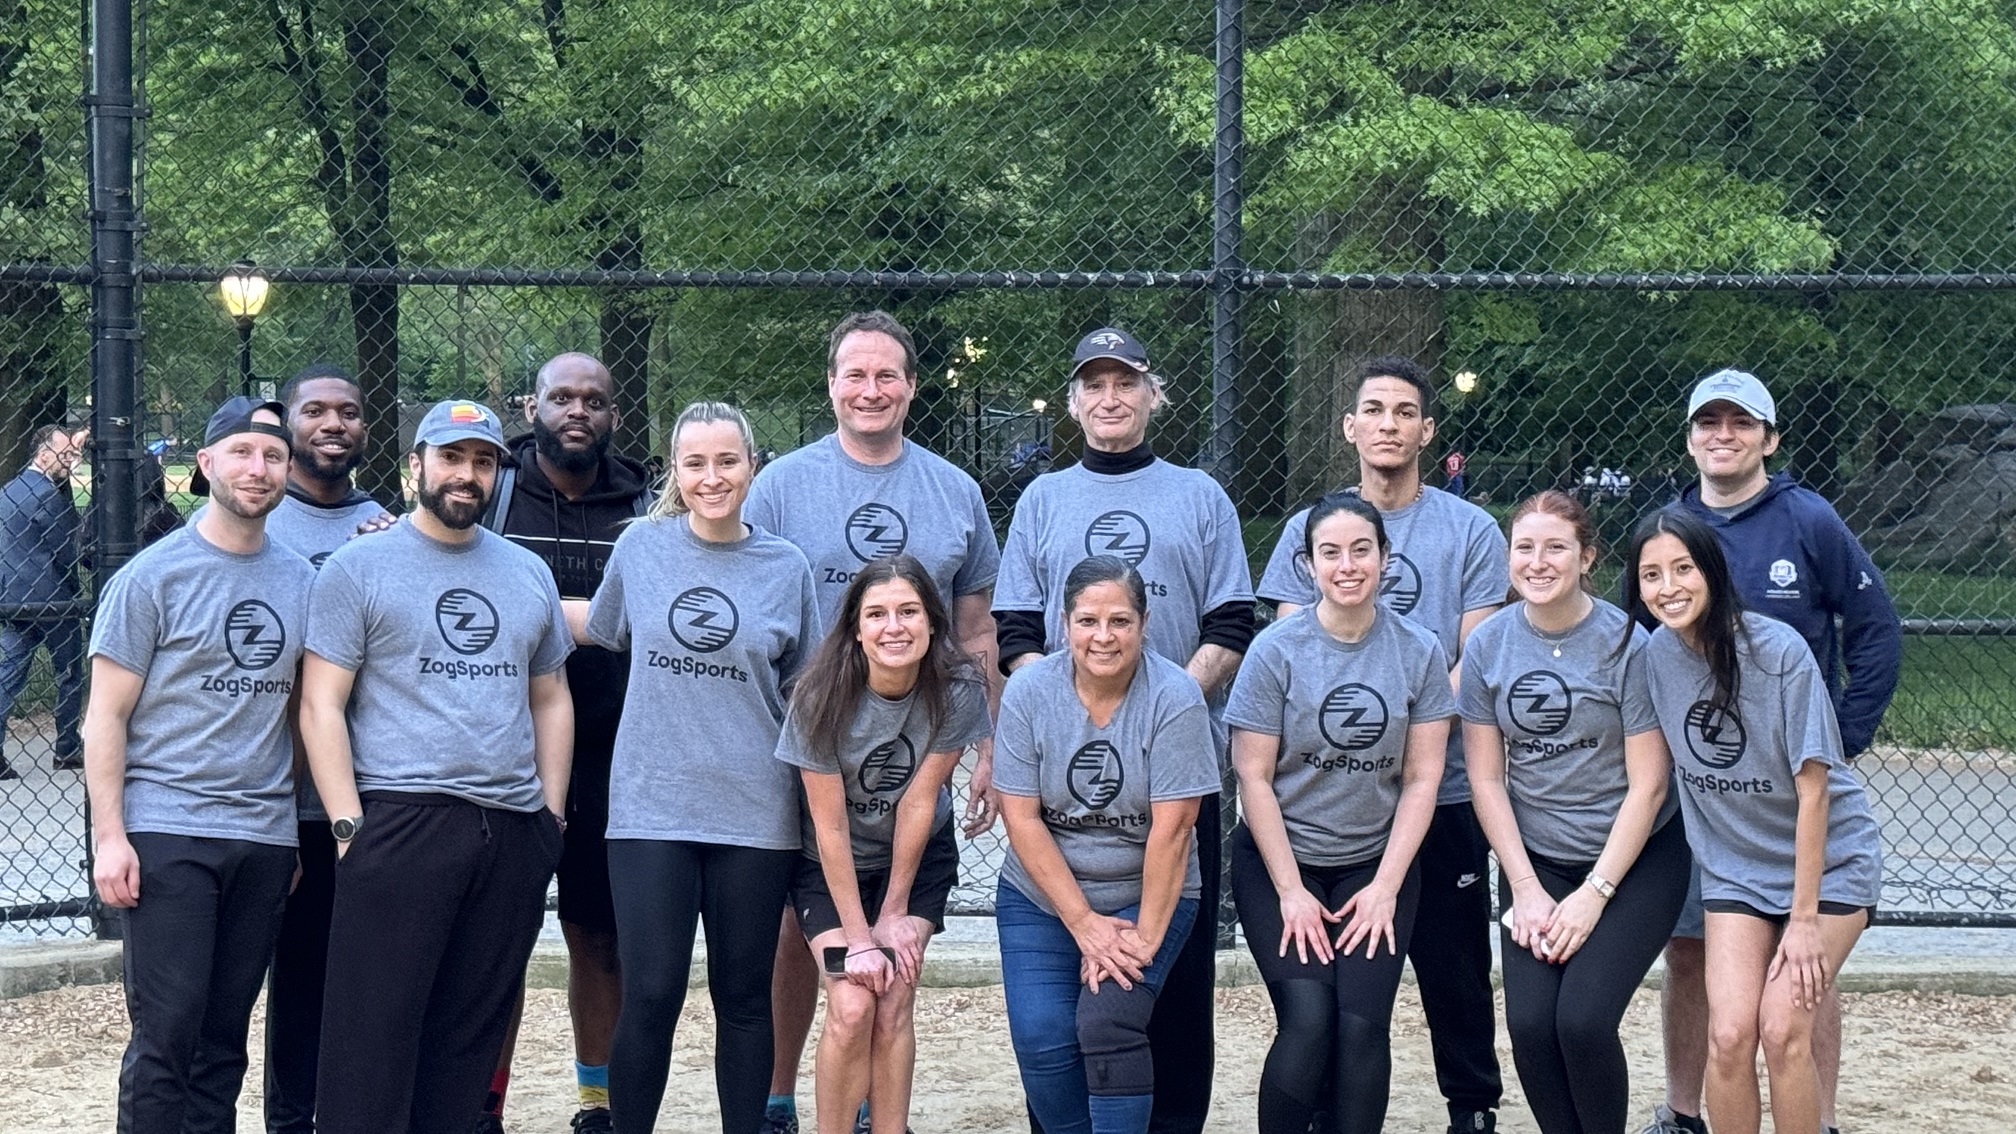 The London Fischer kickball team is in full swing with competitive weekly games against teams from various professions. So far, the season has included solid offense and defense and a couple of highlight worthy plays. A fun activity and great team building for staff, associates and partners. 